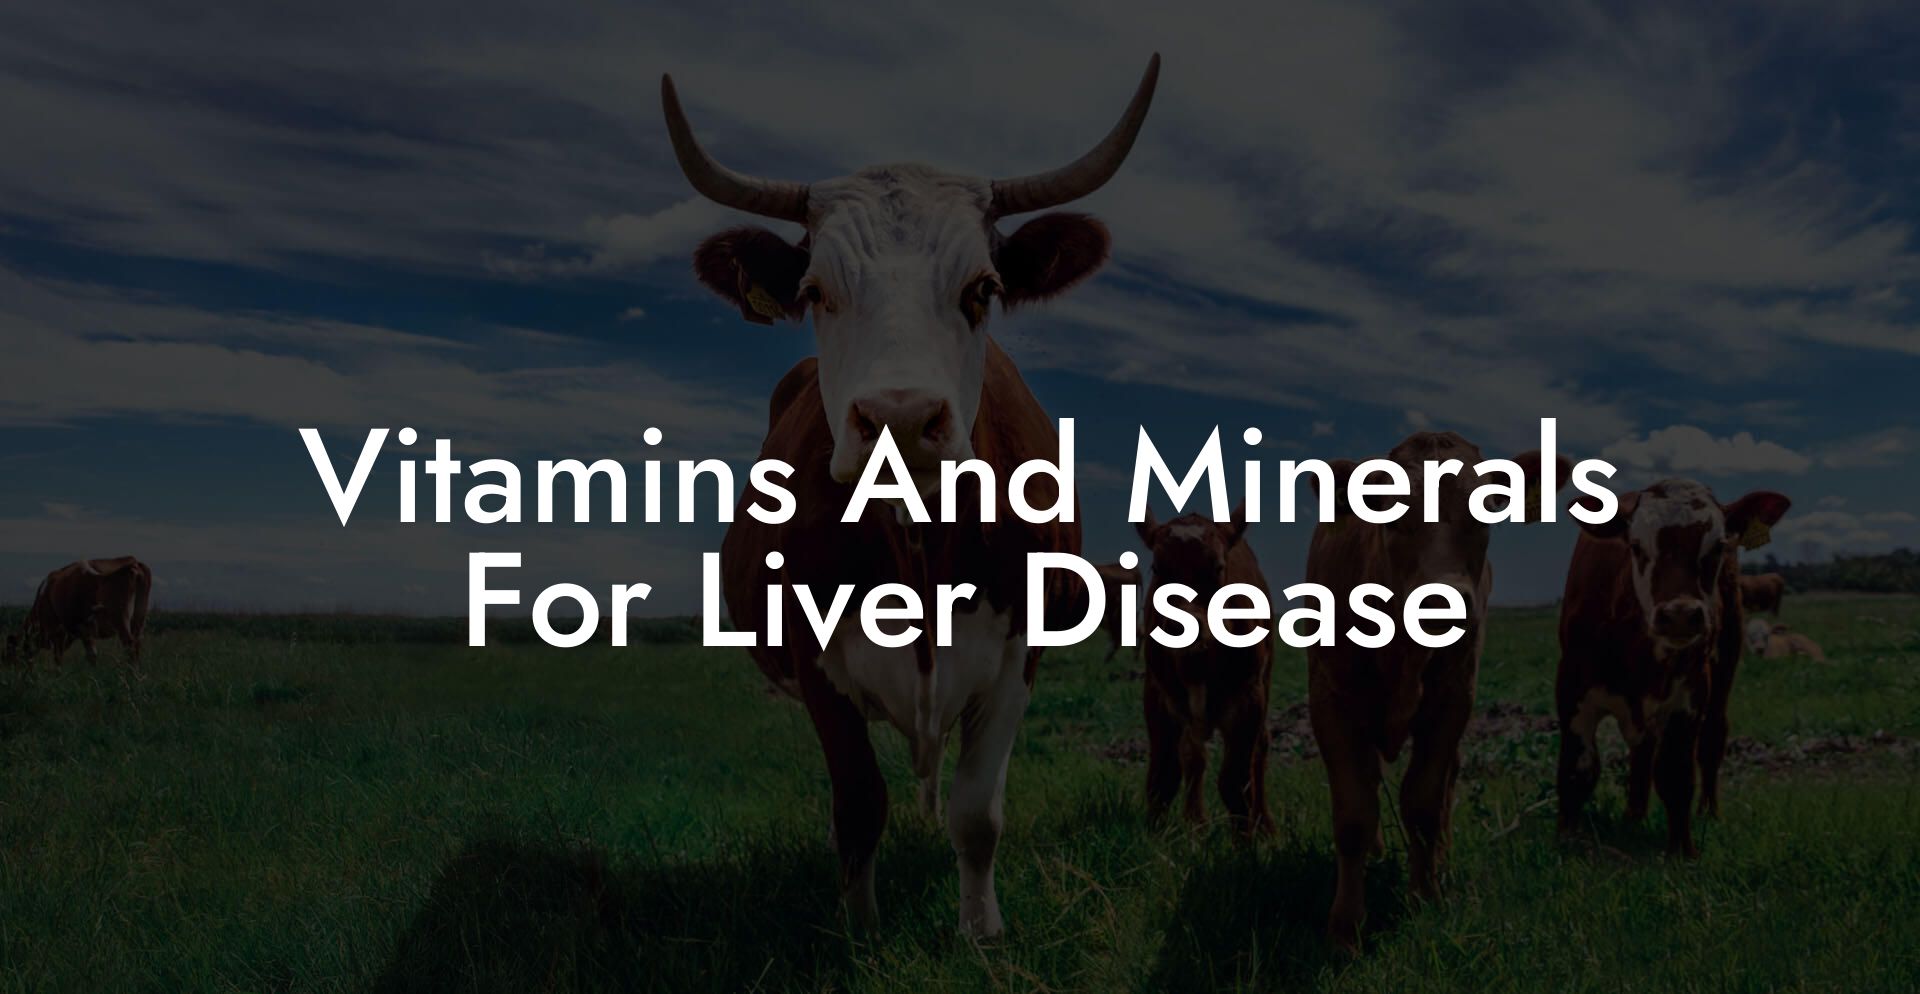 Vitamins And Minerals For Liver Disease